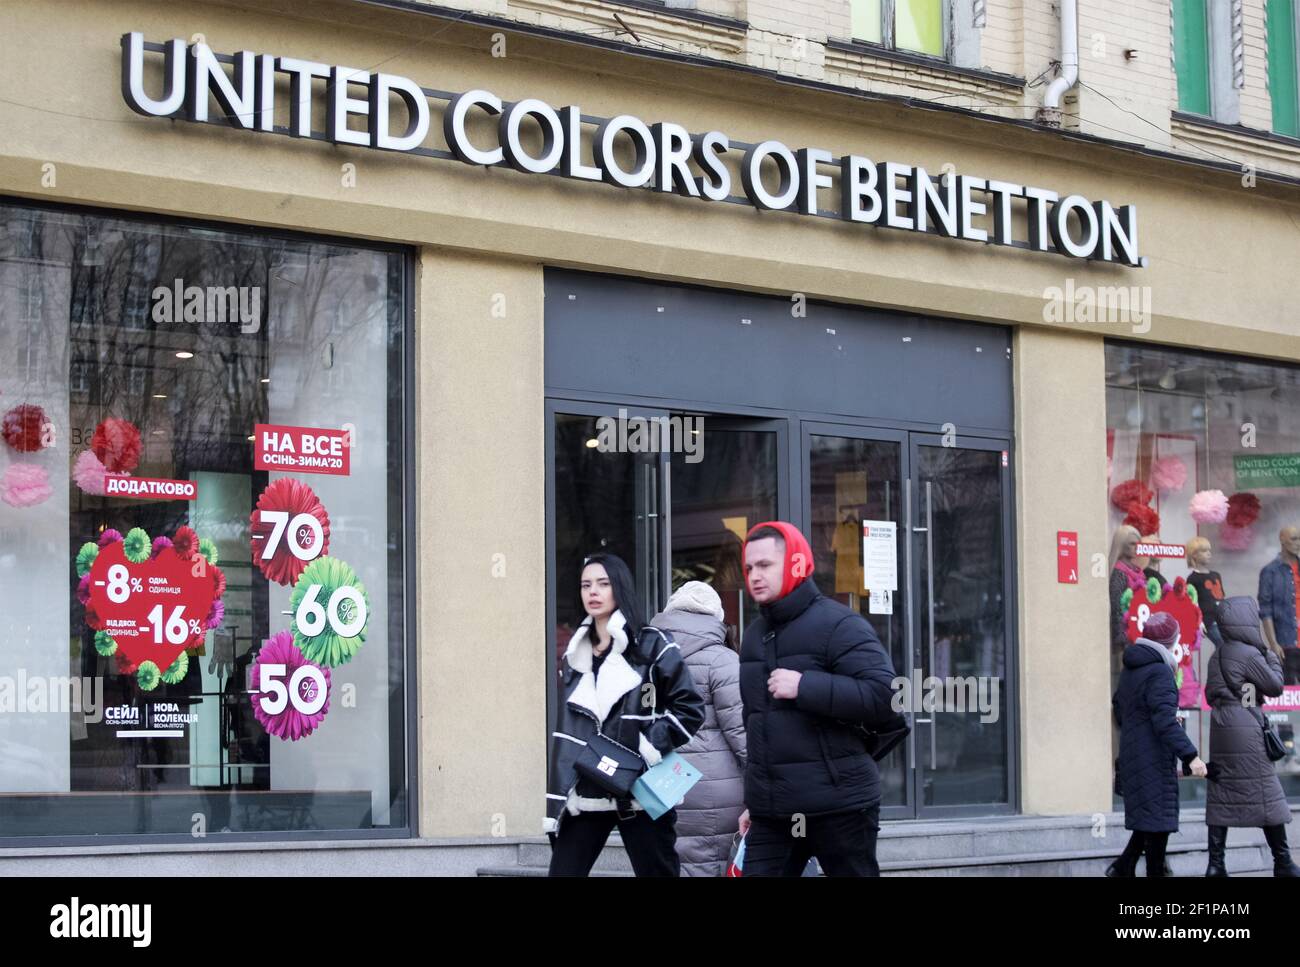 Kiev, Ukraine. 6th Mar, 2021. United Colors of Benetton logo of Benetton  Group seen over the entrance to a brand store of clothing in Kiev. Credit:  Pavlo Gonchar/SOPA Images/ZUMA Wire/Alamy Live News